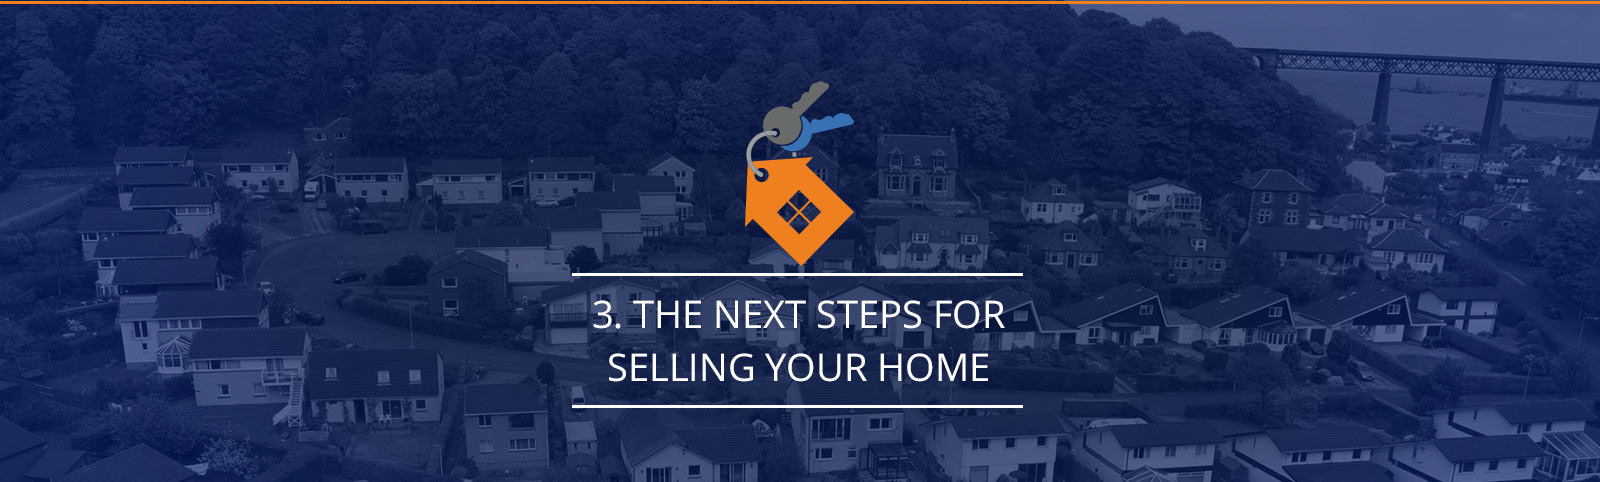 next steps for selling your home